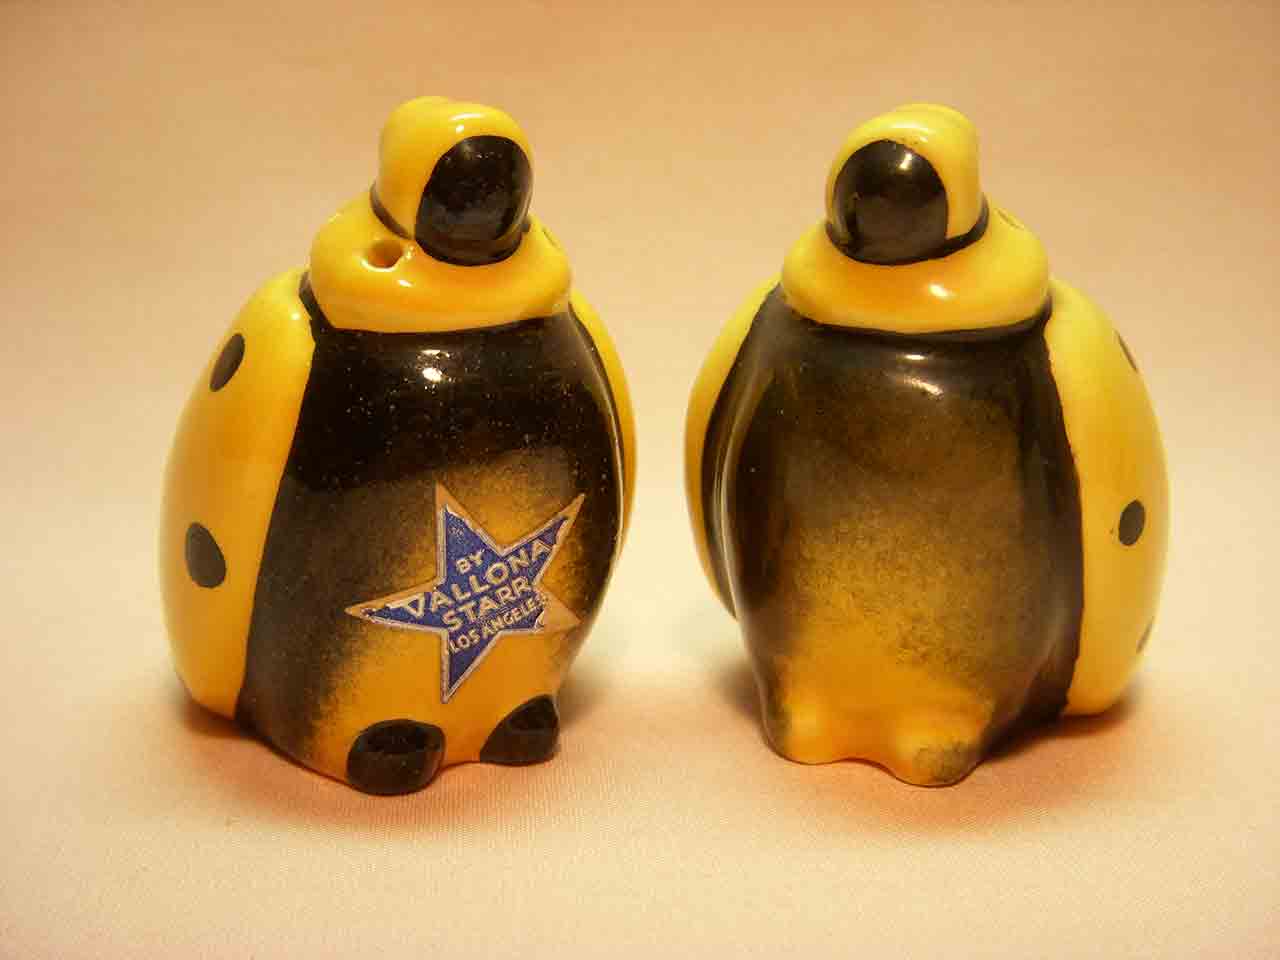 Vallona Starr lady bugs salt and pepper shakers